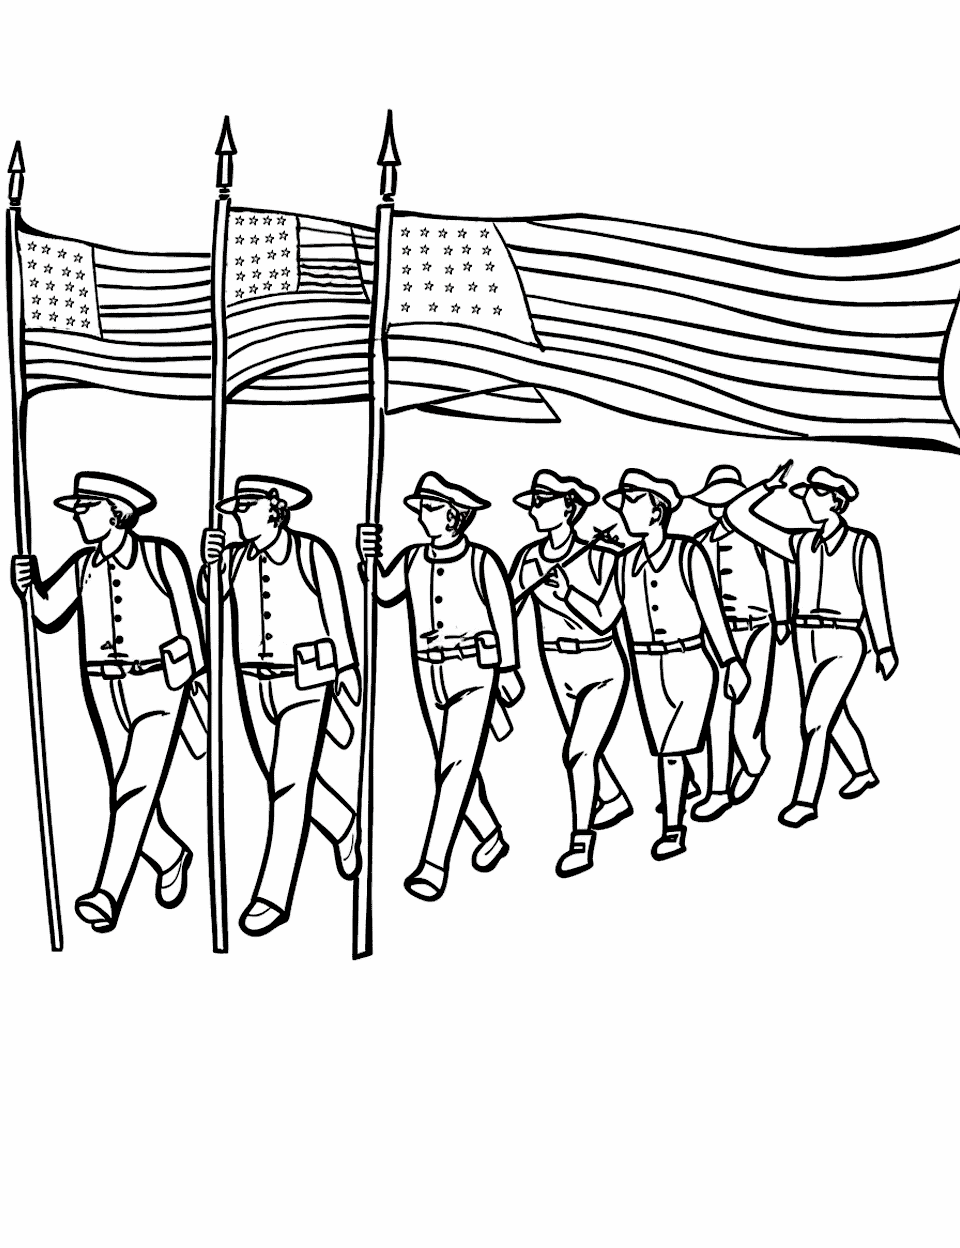 Veterans Day Parade American Flag Coloring Page - Veterans marching in a parade with American flags.